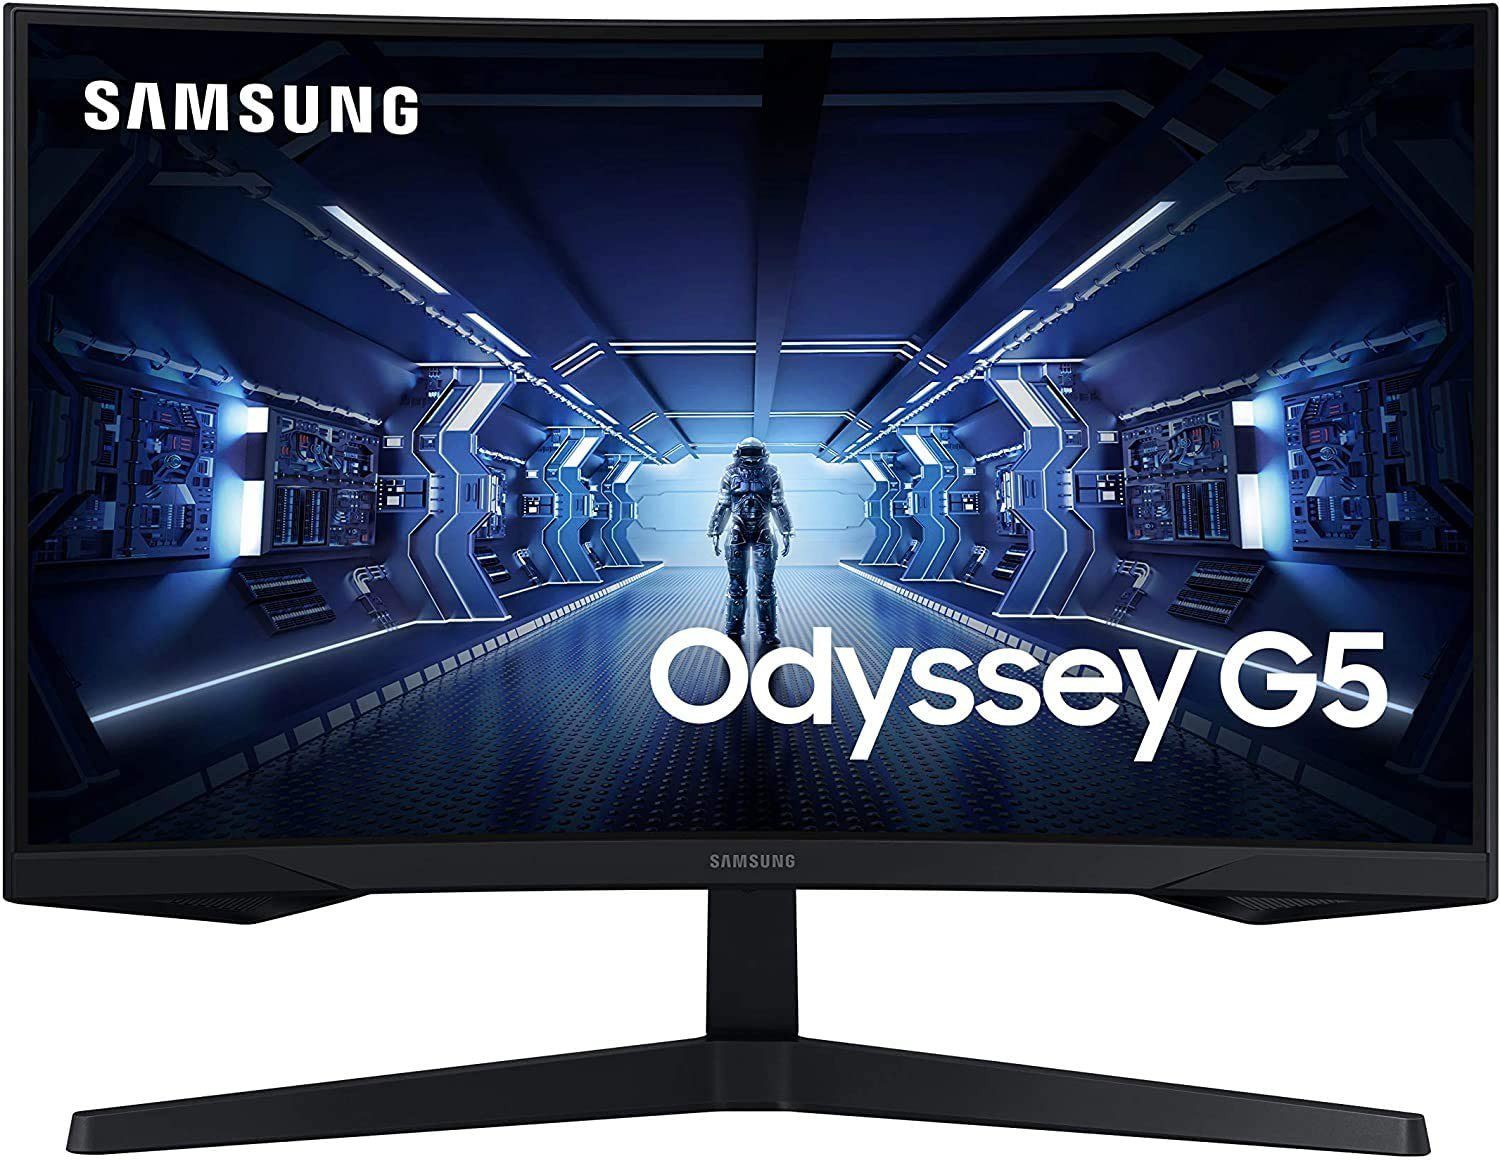 Samsung 27" G5 Odyssey Gaming Monitor With 1000R Curved Screen - LC27G55TQWMXUE